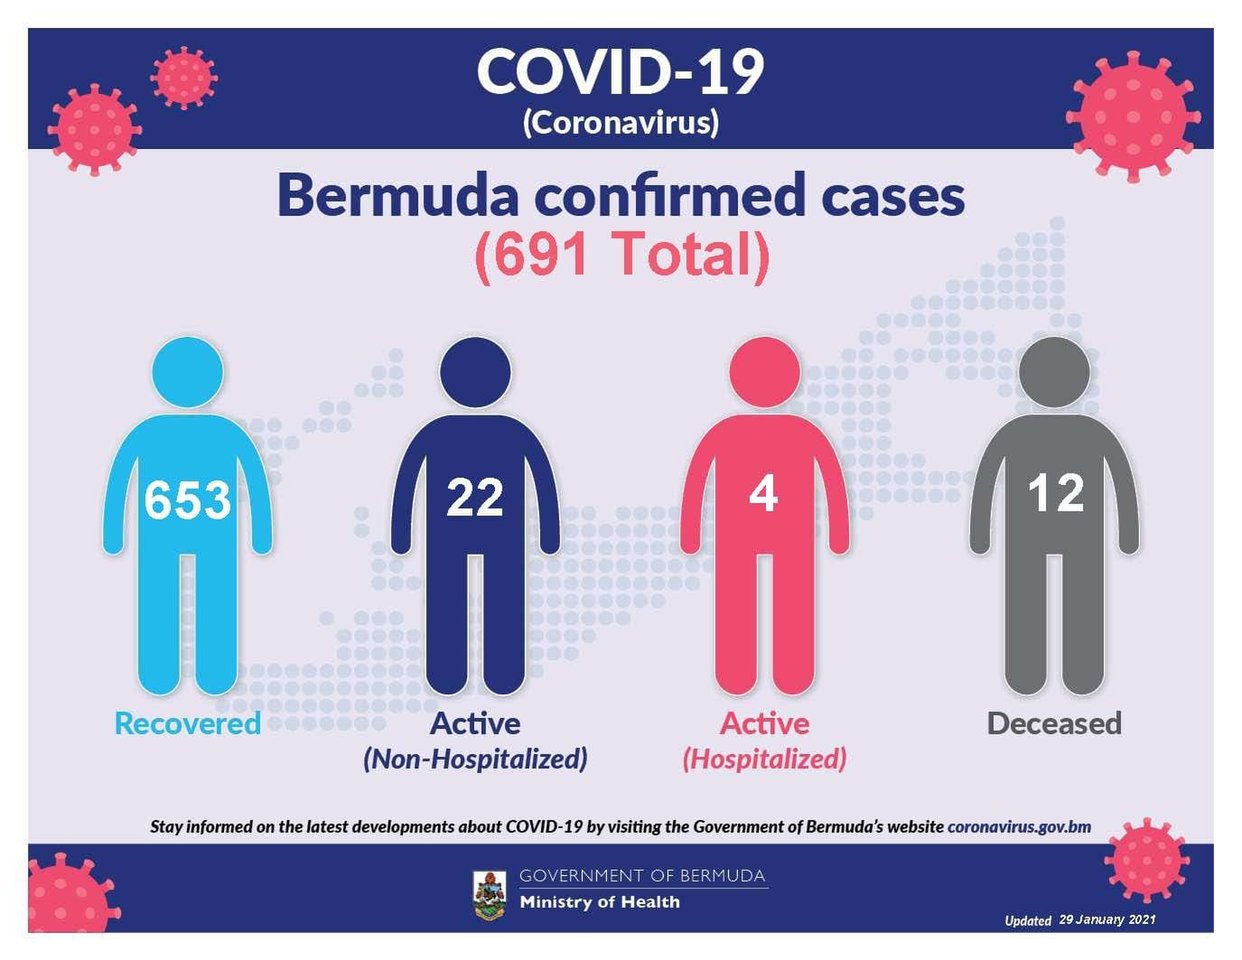 One new COVID-19 case reported in Bermuda, 29 January